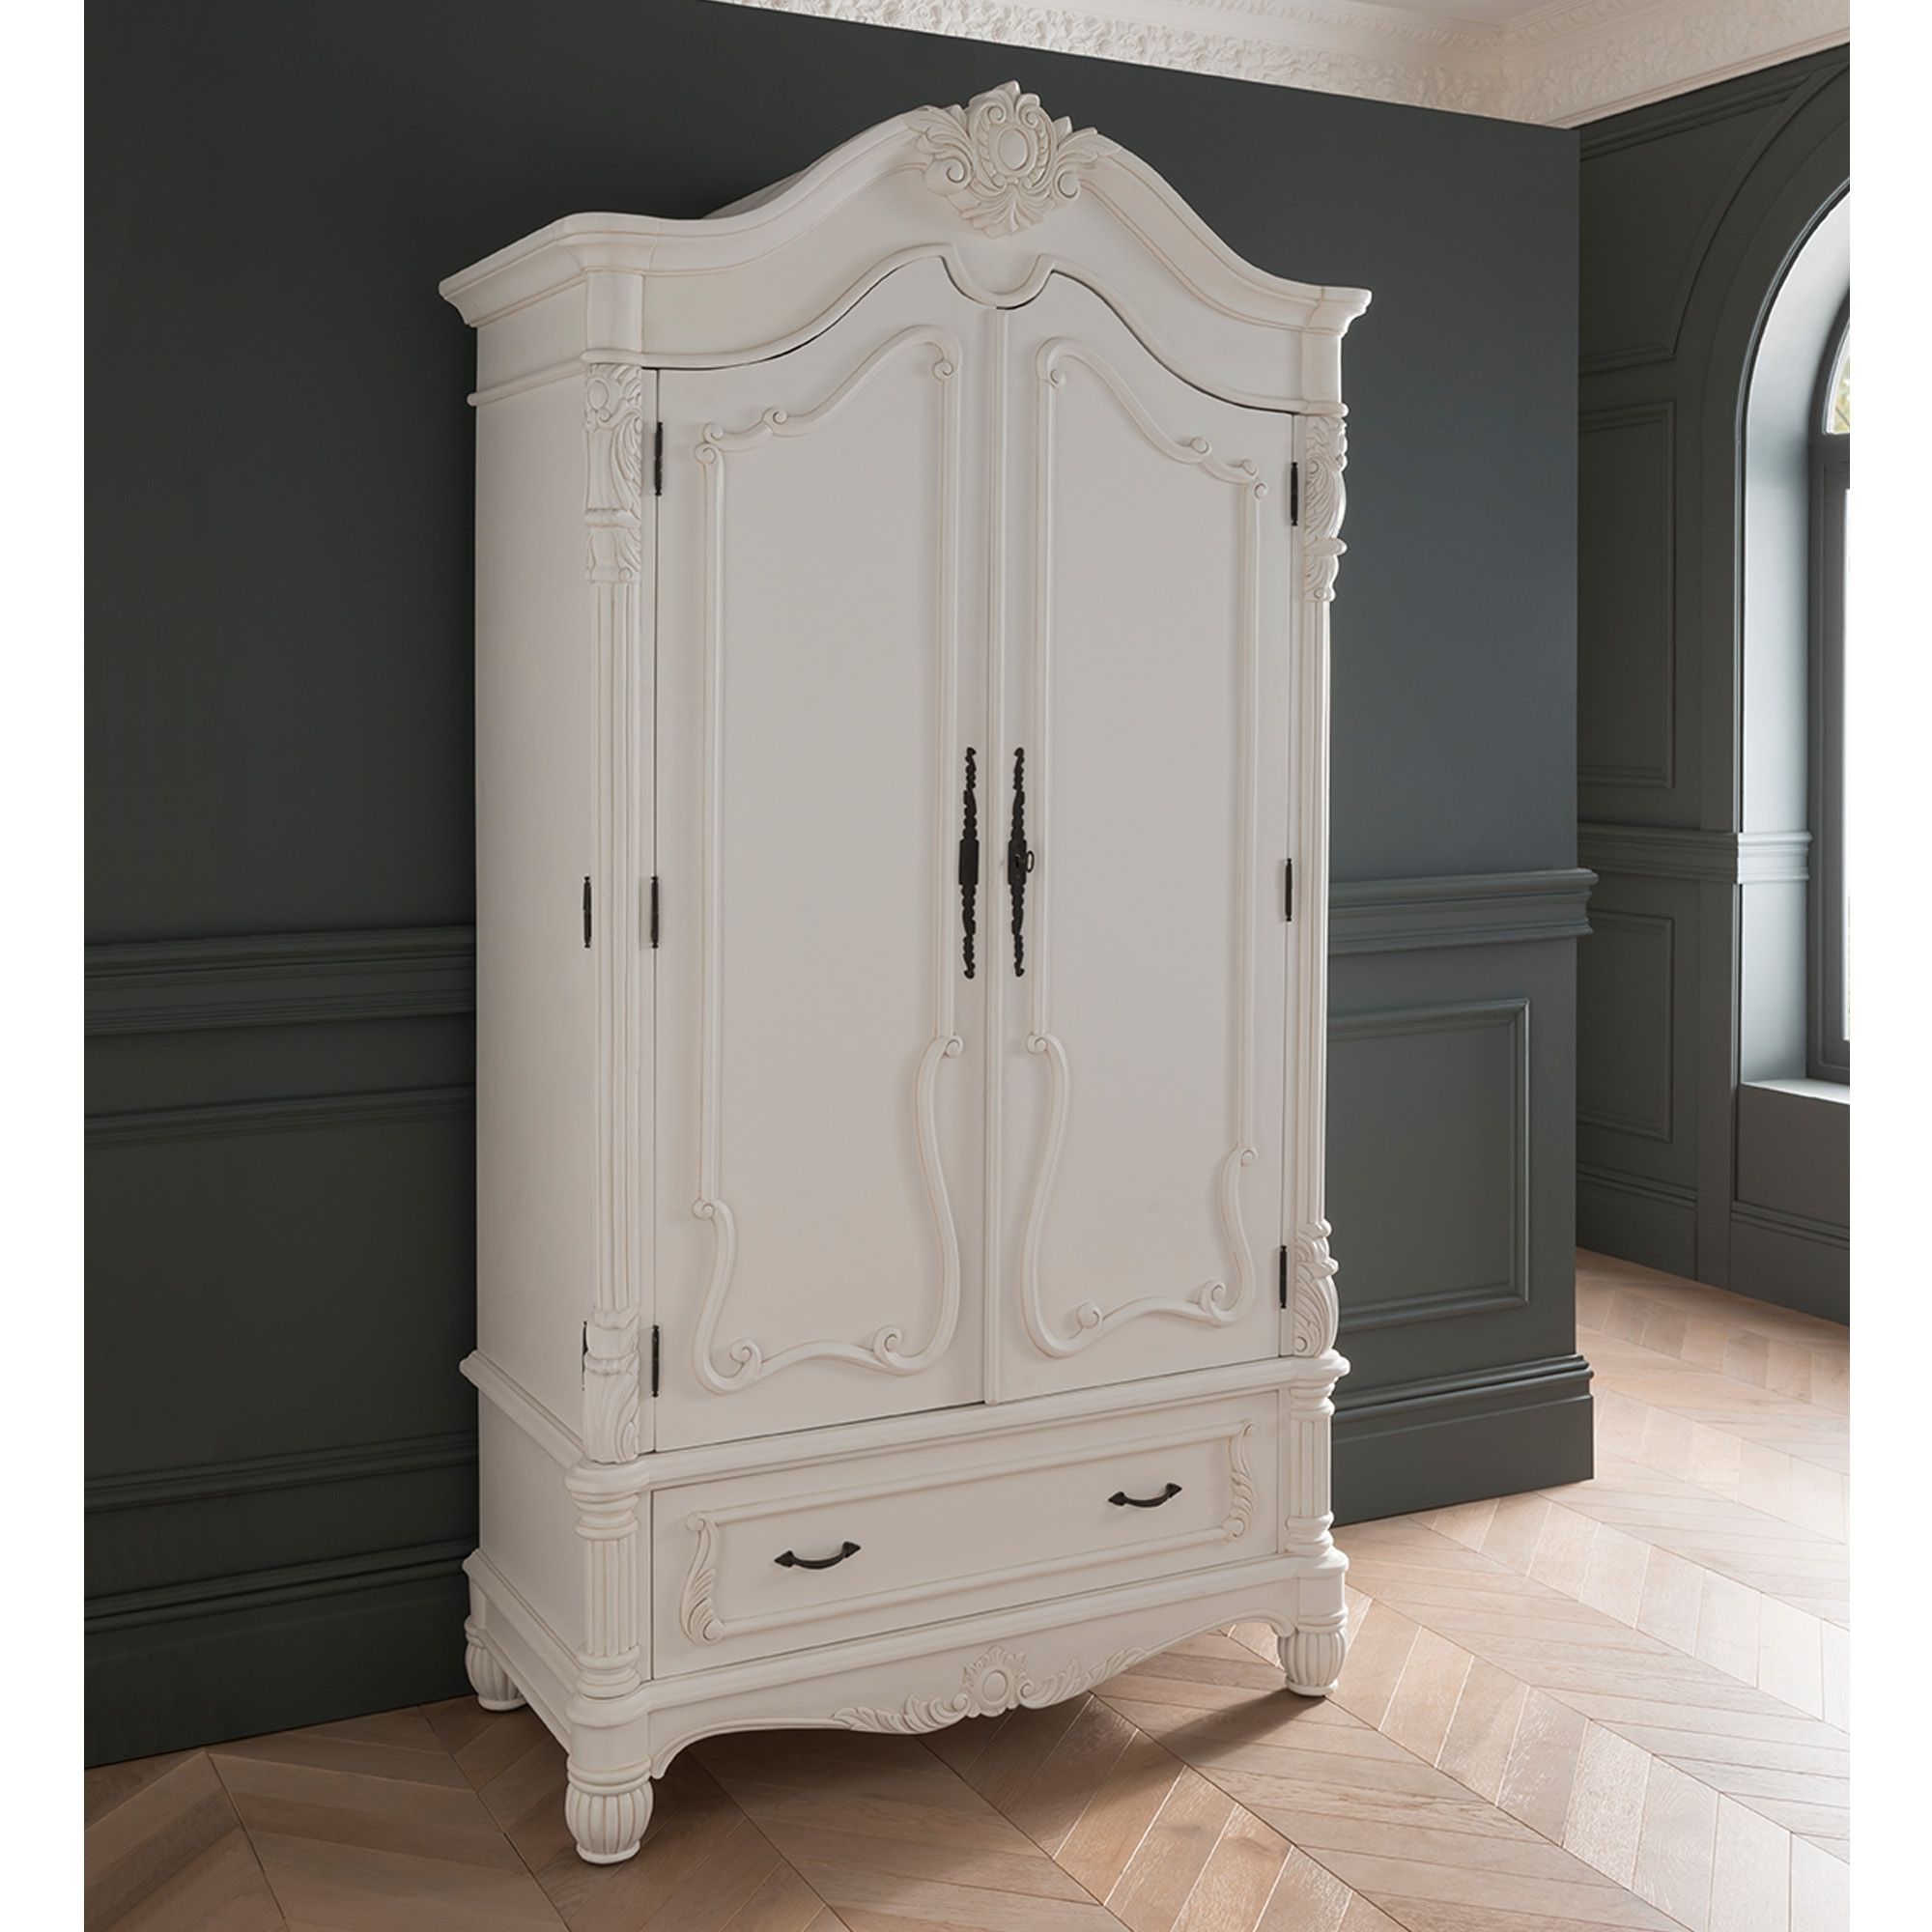 Antique French Style White Finished 1 Drawer Wardrobe | Homesdirect365 In Antique Style Wardrobes (View 4 of 20)